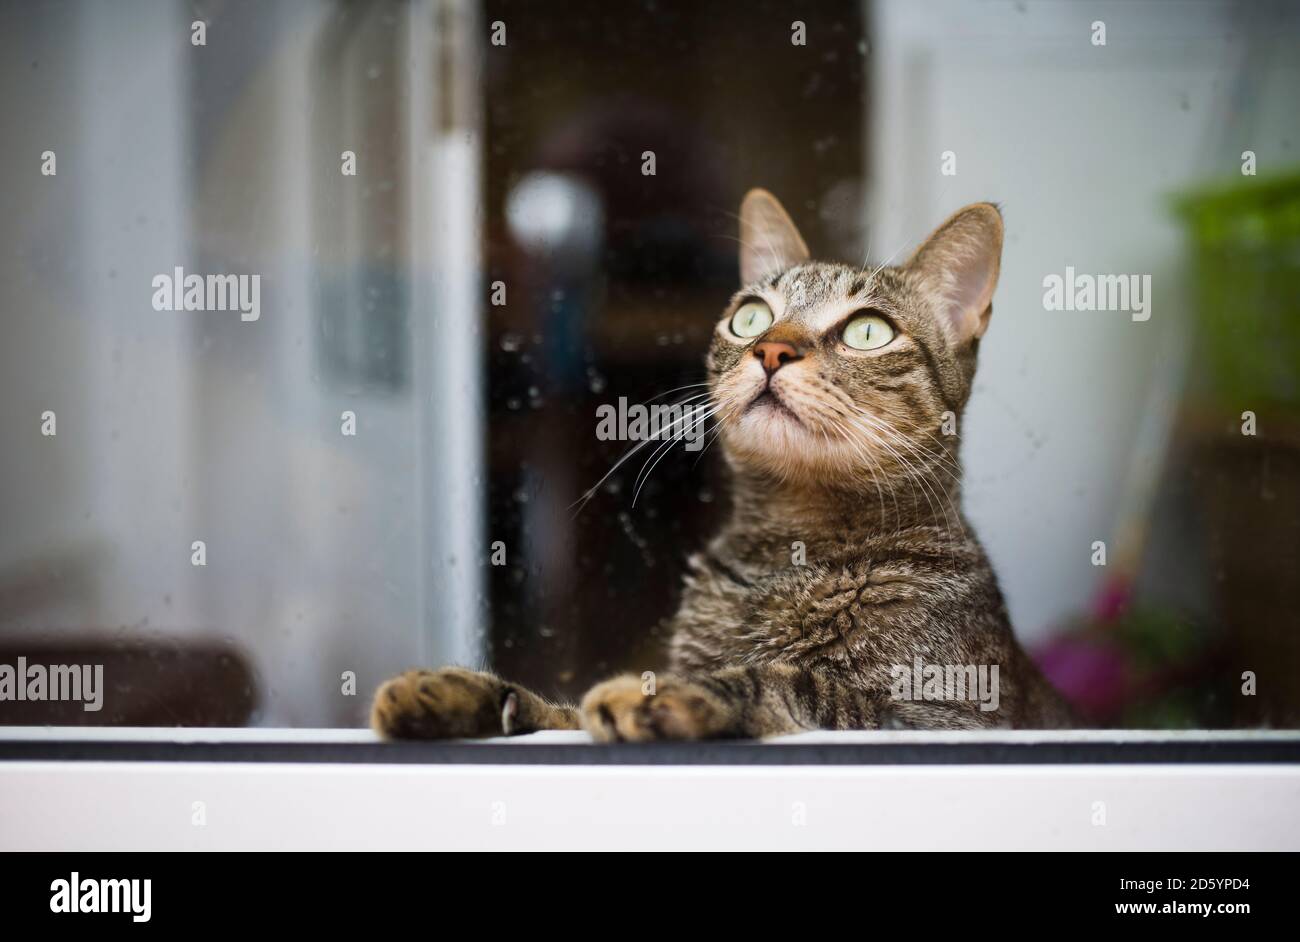 Tabby cat looking up through a wet window Stock Photo